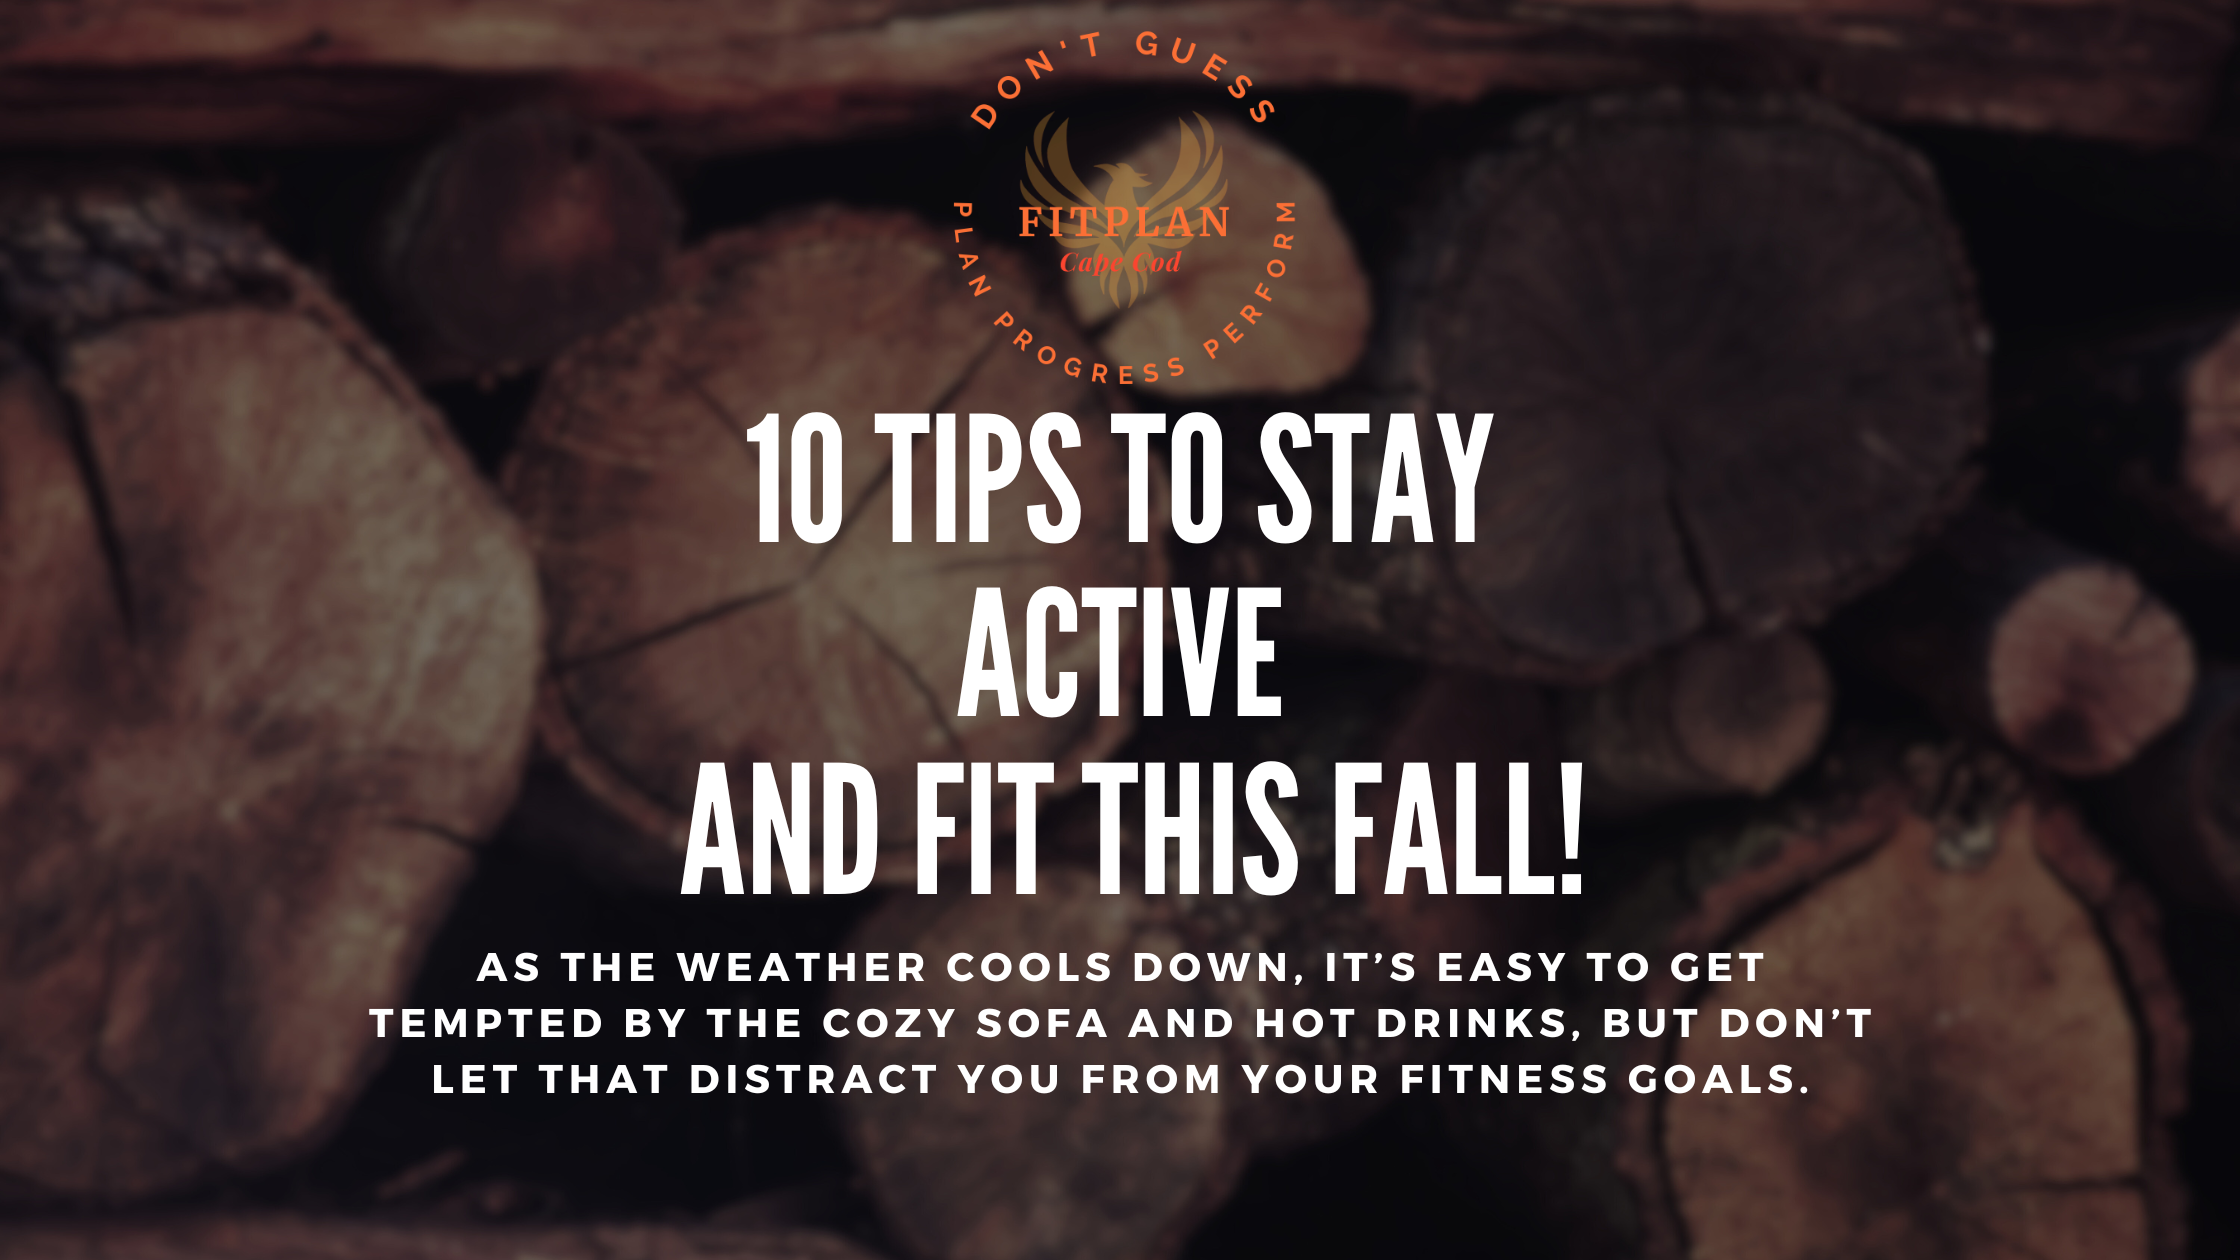 10 tips to stay active